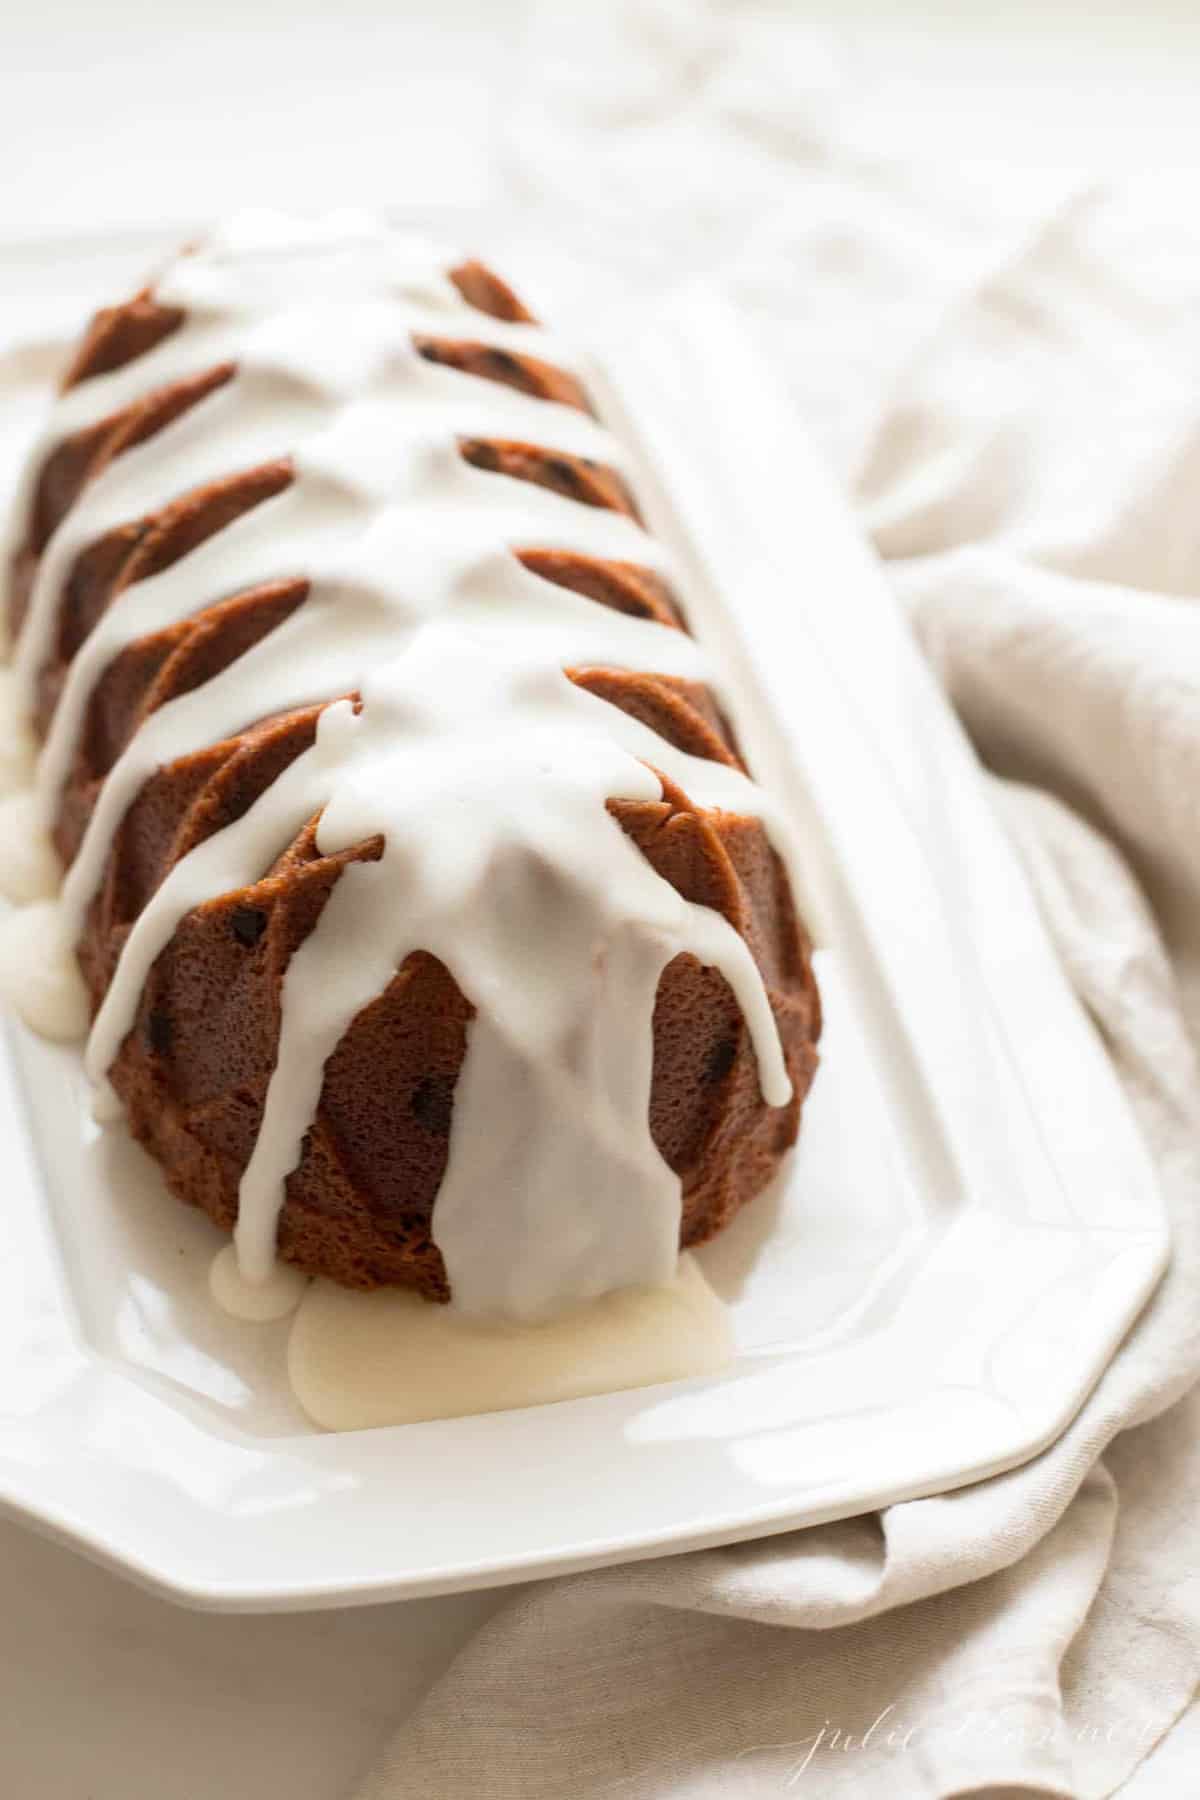 White tray with a dark cake loaf resting on top, glaze dripping onto surface.